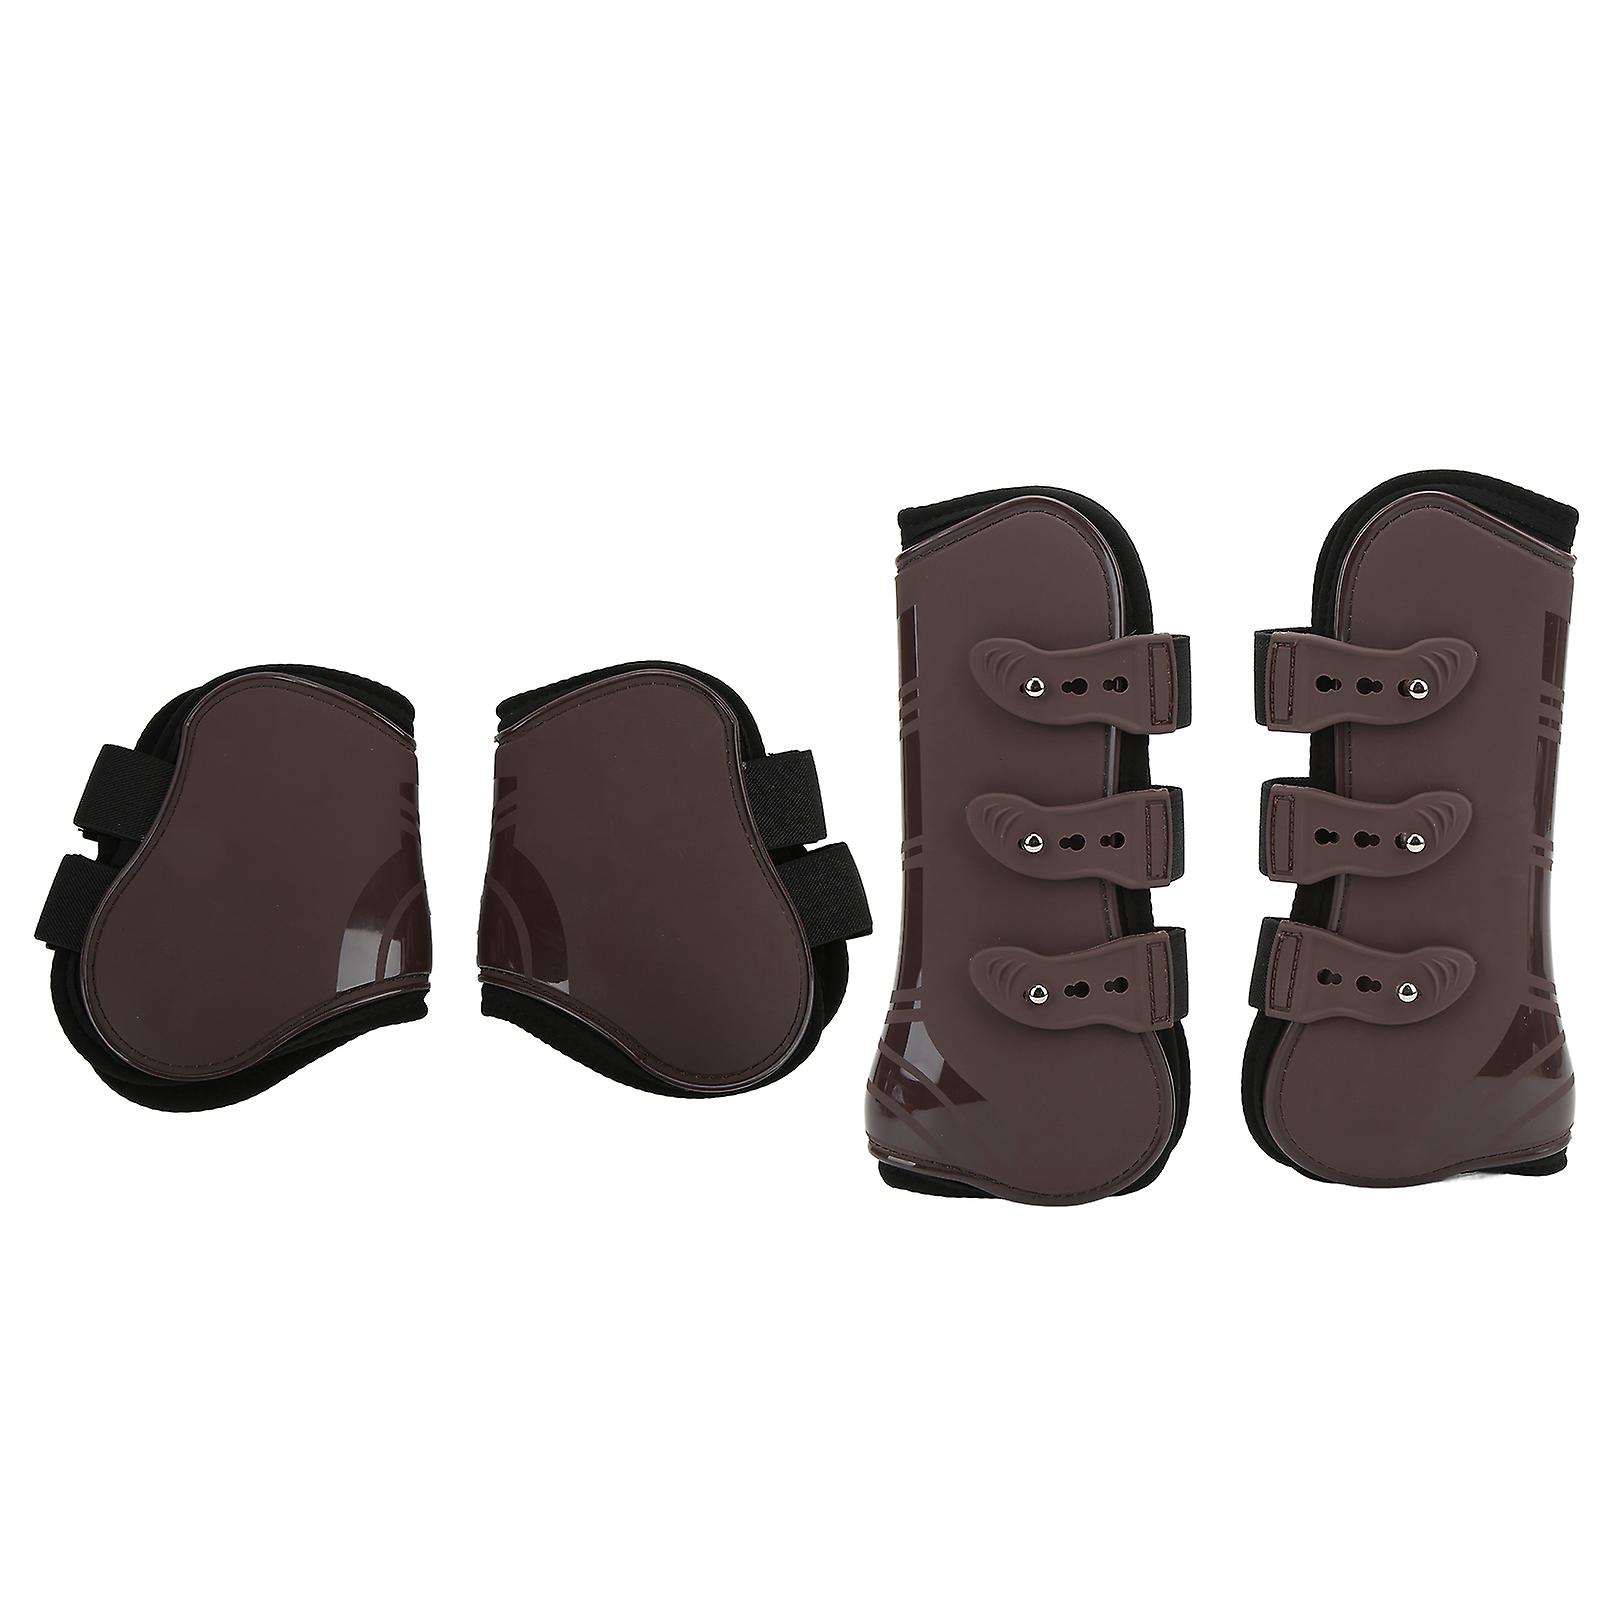 4pcs Horse Front Hind Leg Boots Pu + Neoprene Horse Tendon Brace Guards Horse Protection Gearsbrown Front And Hind Set L